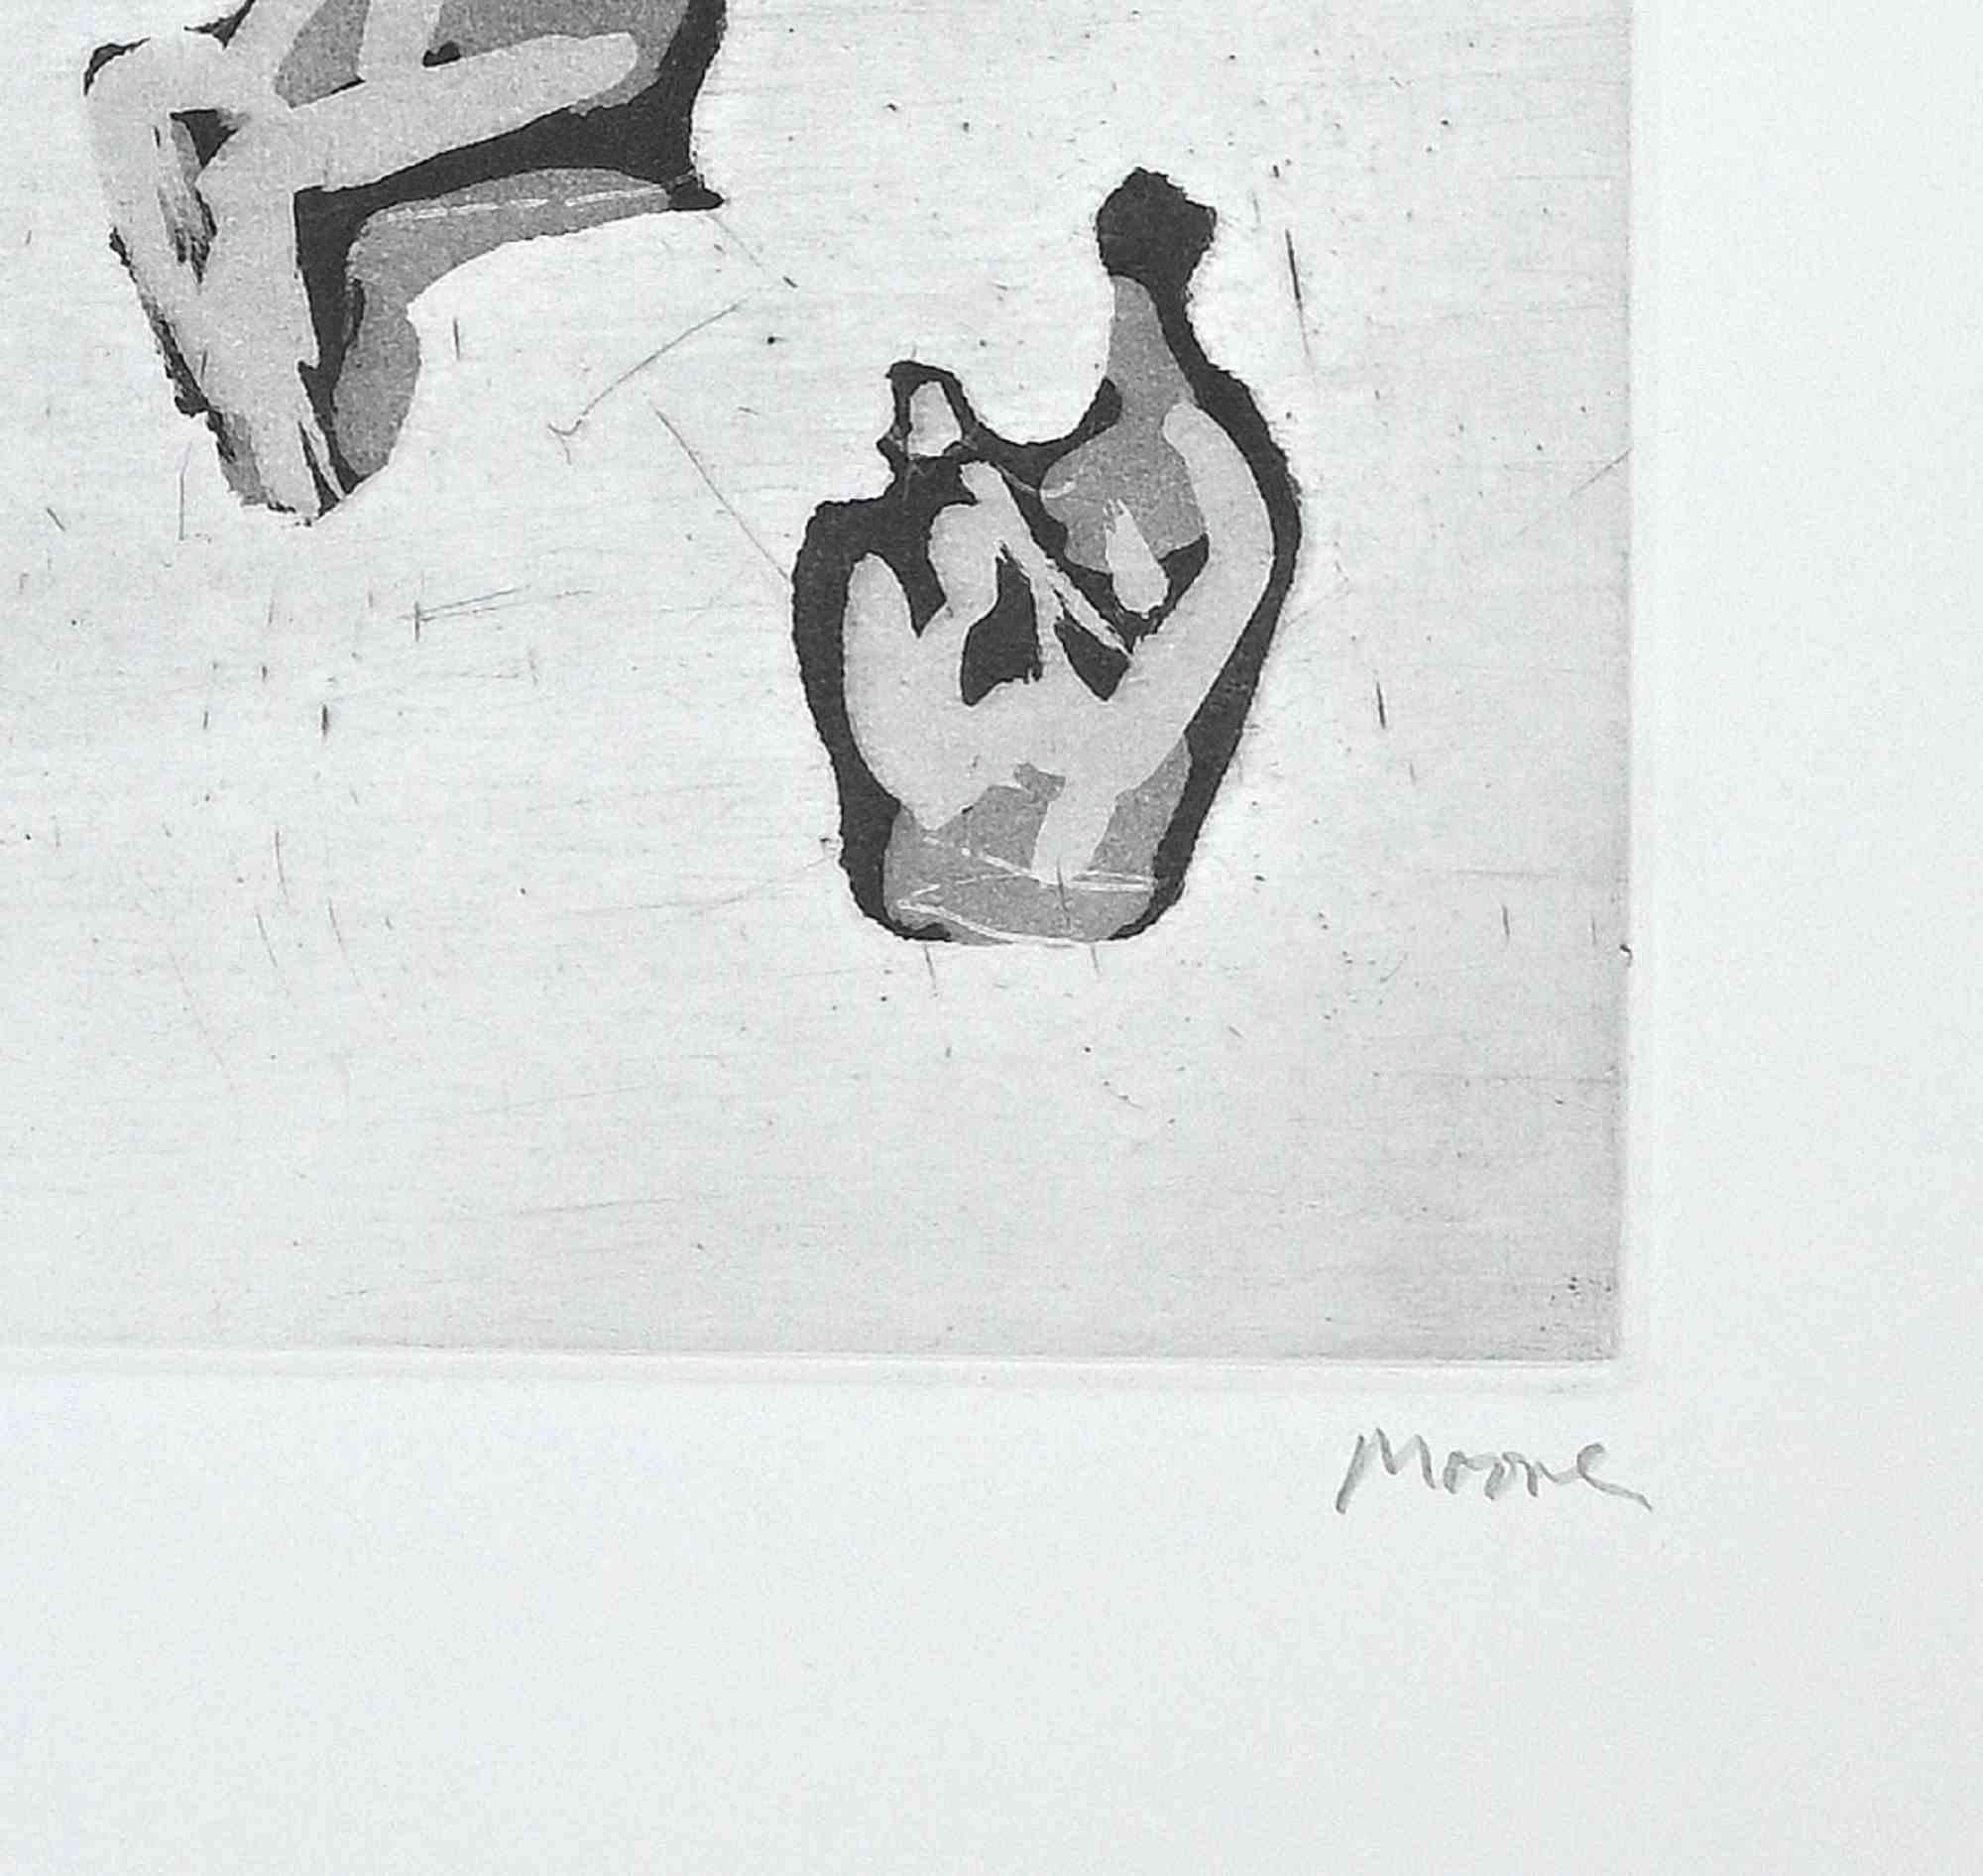 Six mother and child studies is an original contemporary artwork realized by the British artist  Henry Moore  (Castleford, 1898 - Much Hadham, 1986) in 1976

Original Aquatint and Etching.

Hand-signed on the lower right in pencil: Moore .

Numbered